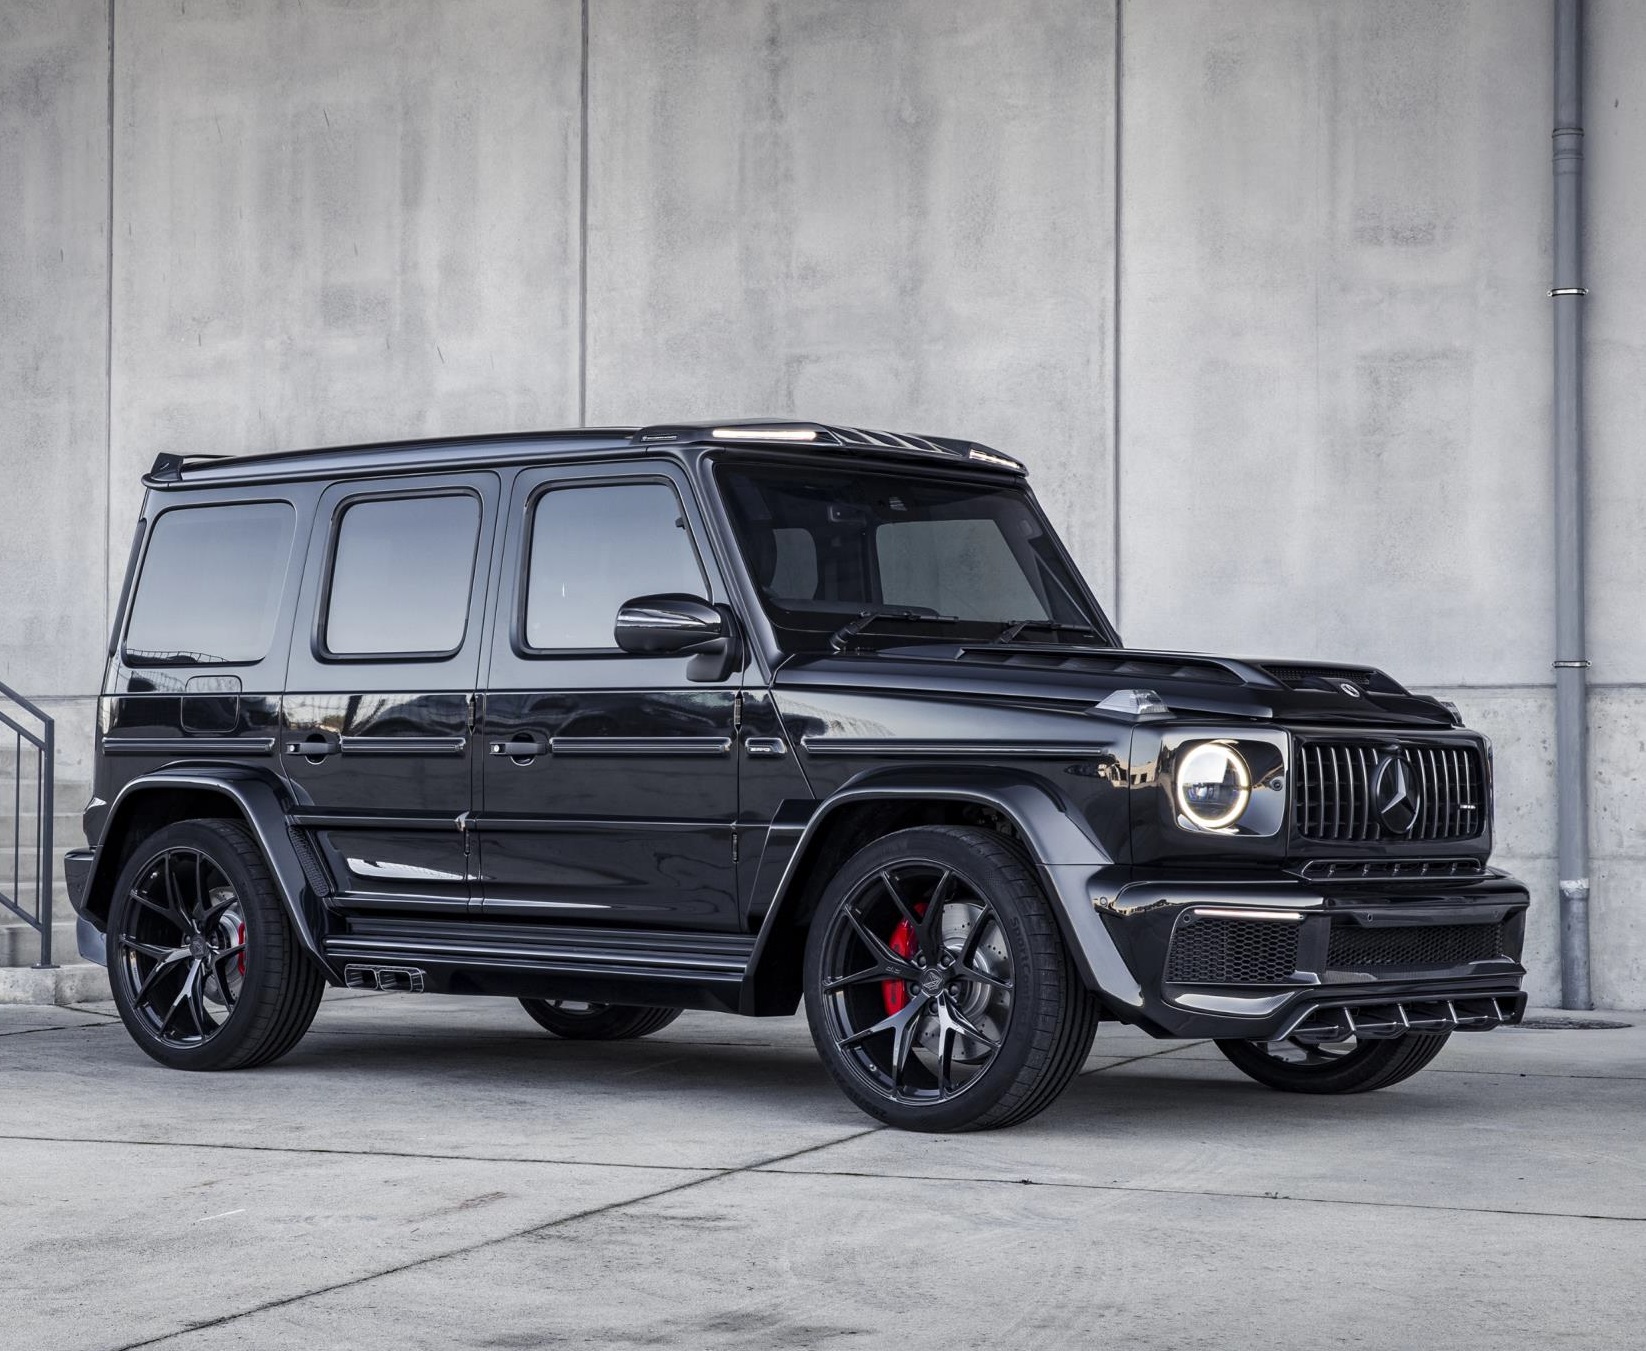 Brabus G63/G65 Logo for Side of the Car 